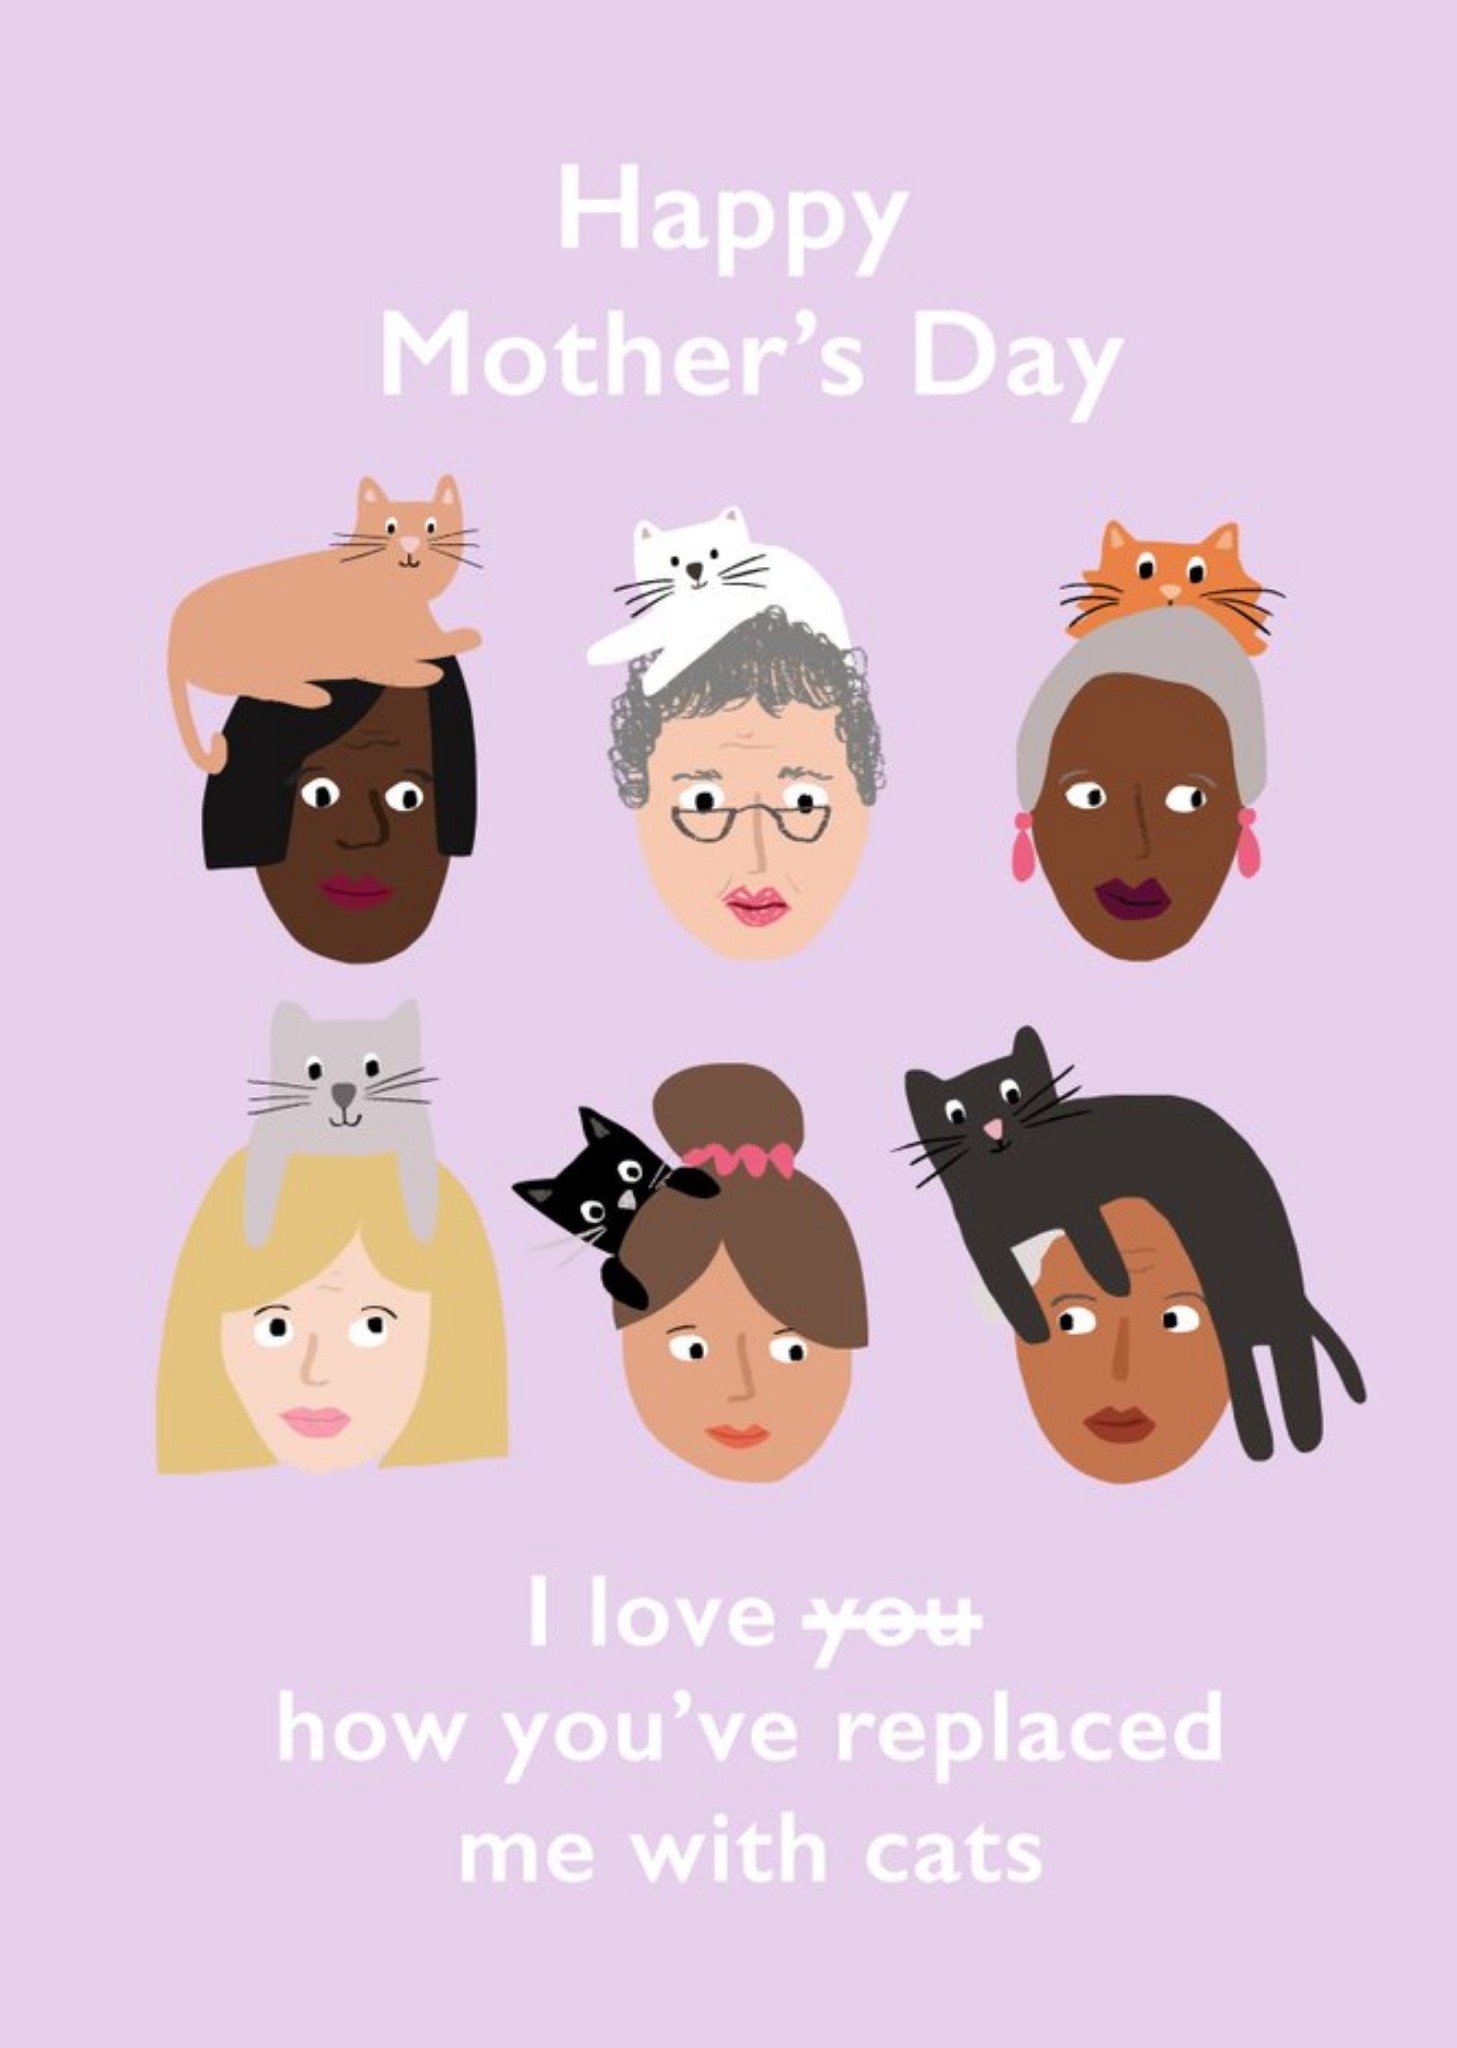 Moonpig Funny Happy Mother's Day Replaced Me With Cats Card Ecard